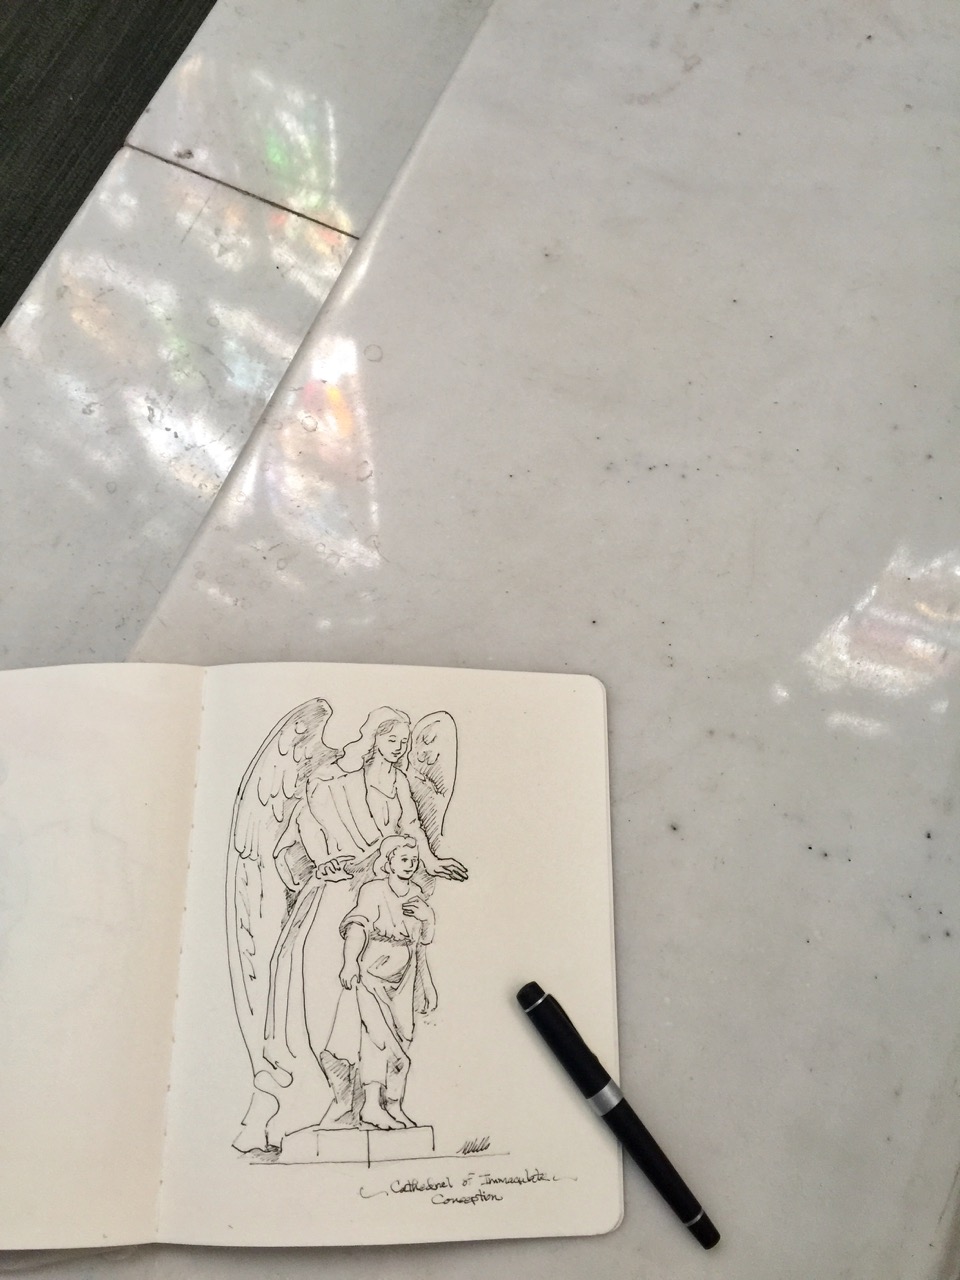 My sketch of Jesus and Angel at Cathedral of Immaculate Conception